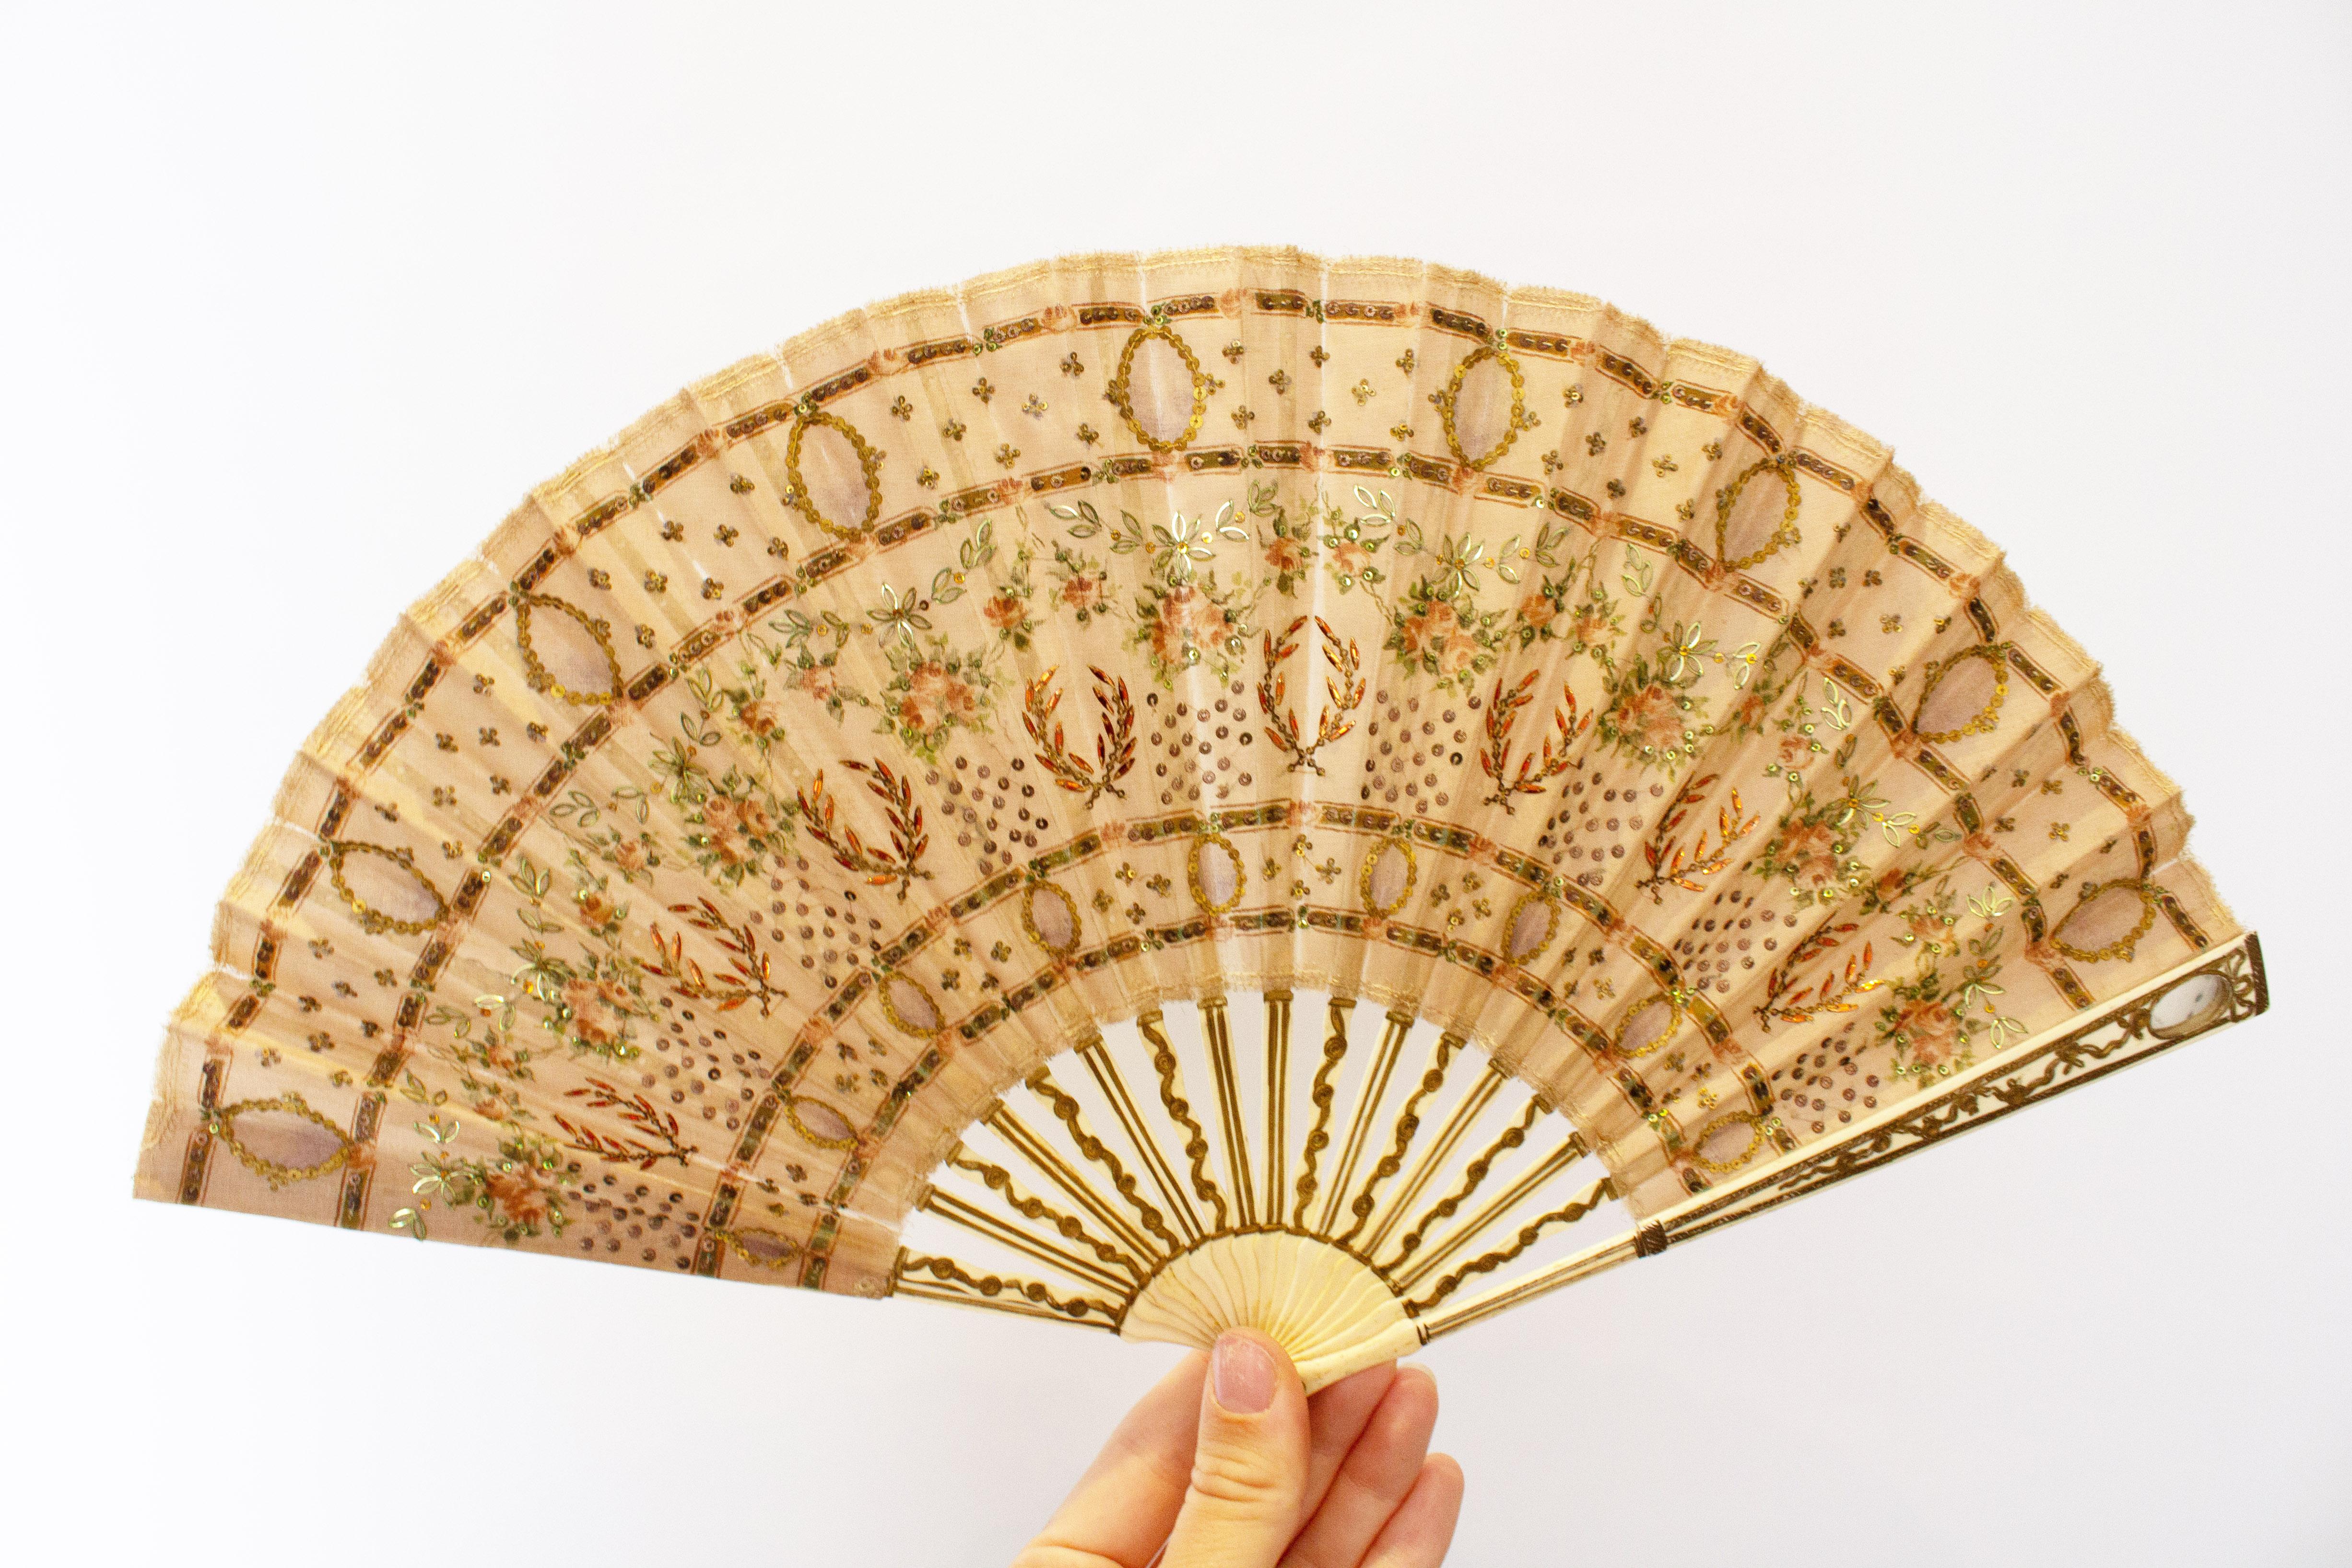 An attractive and rare vintage fan. The ivory sticks and handle are decorated with 'gold', and one side has a charming small mirror. The fabric is decorated with sequins and beads. Maximum width 16'', height 9''